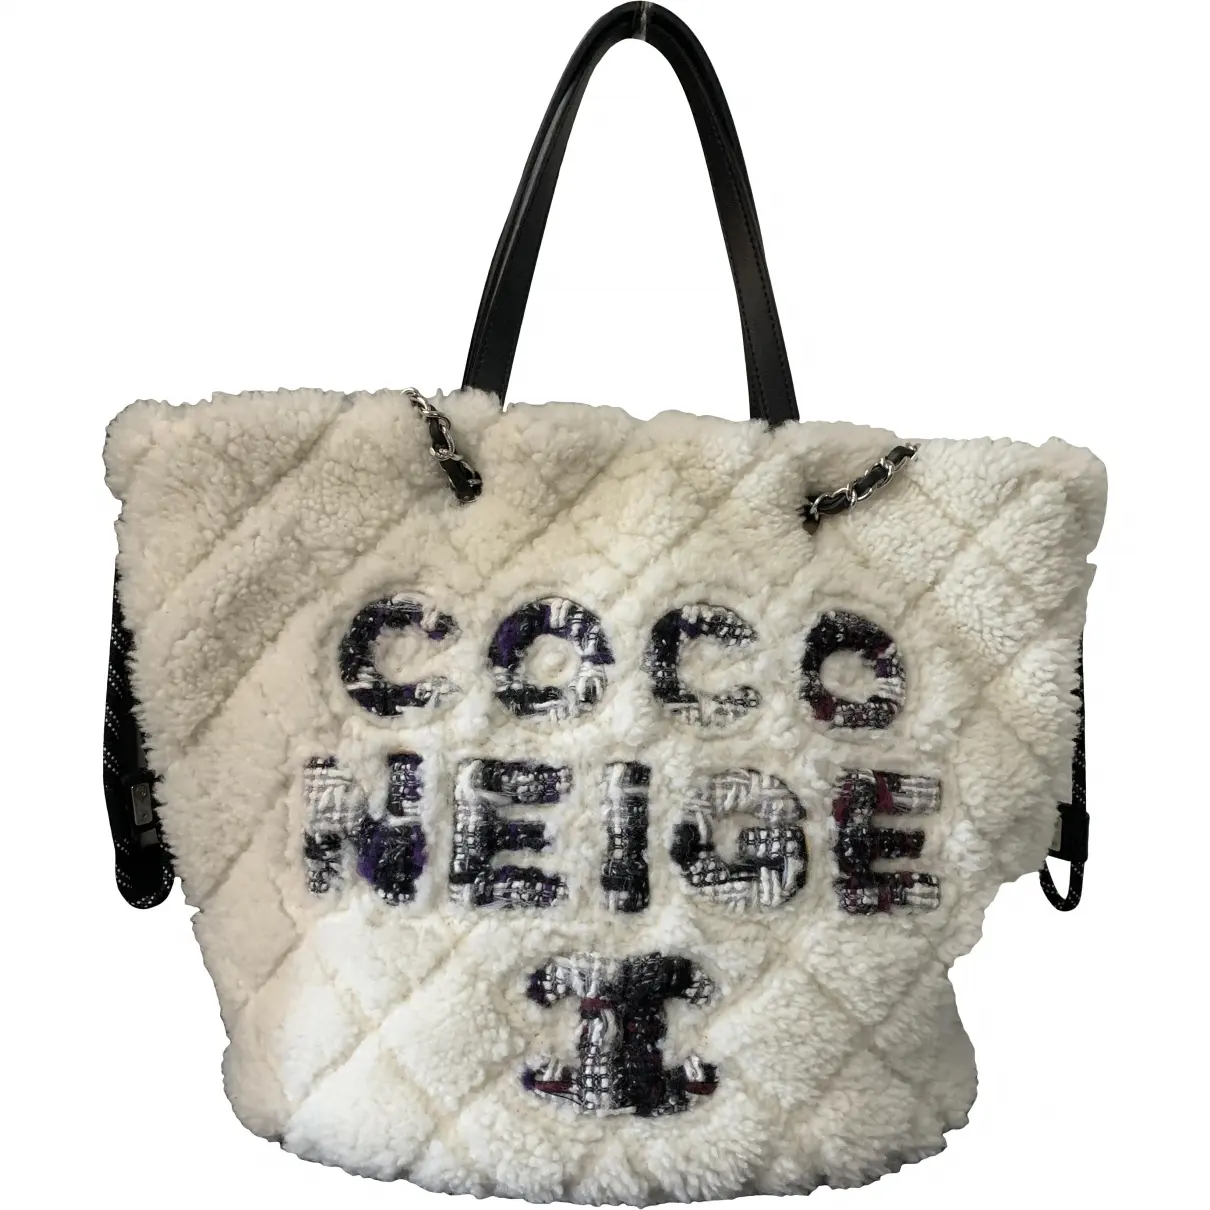 Shearling tote Chanel